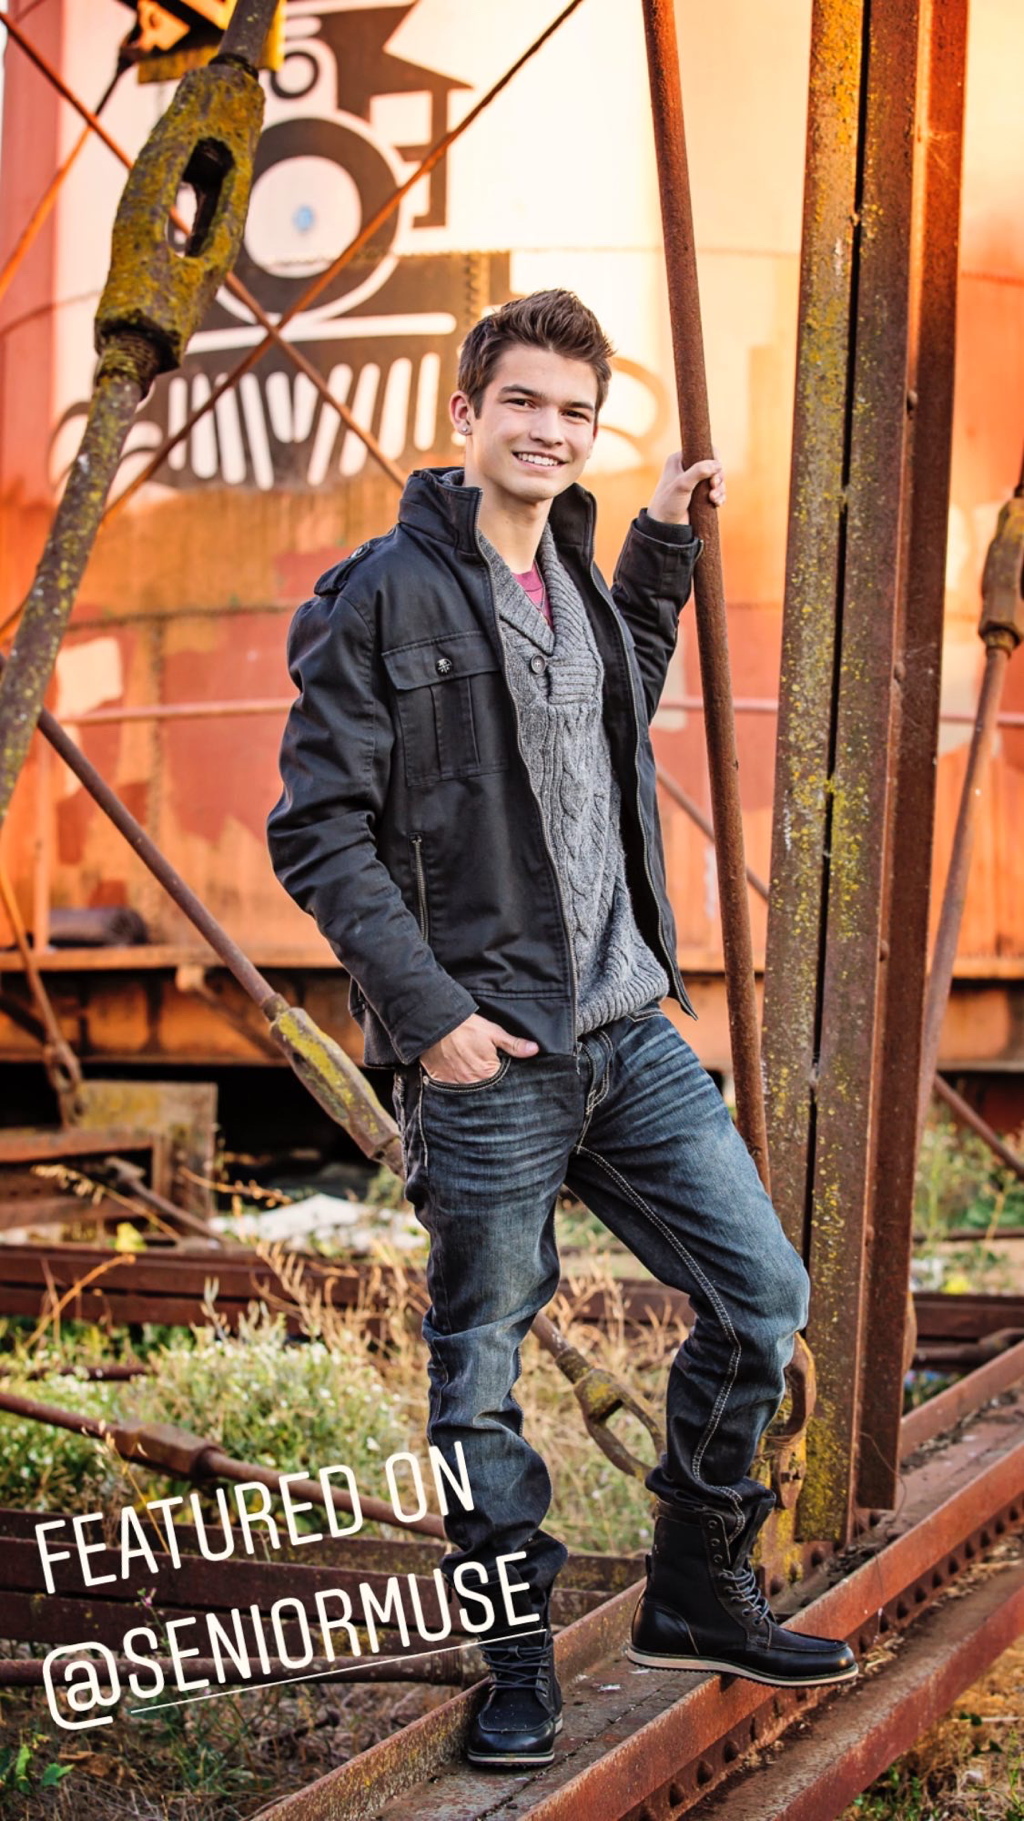 teenage boy with brown hair black jacket, blue jeans, standing on an old abandoned railroad track